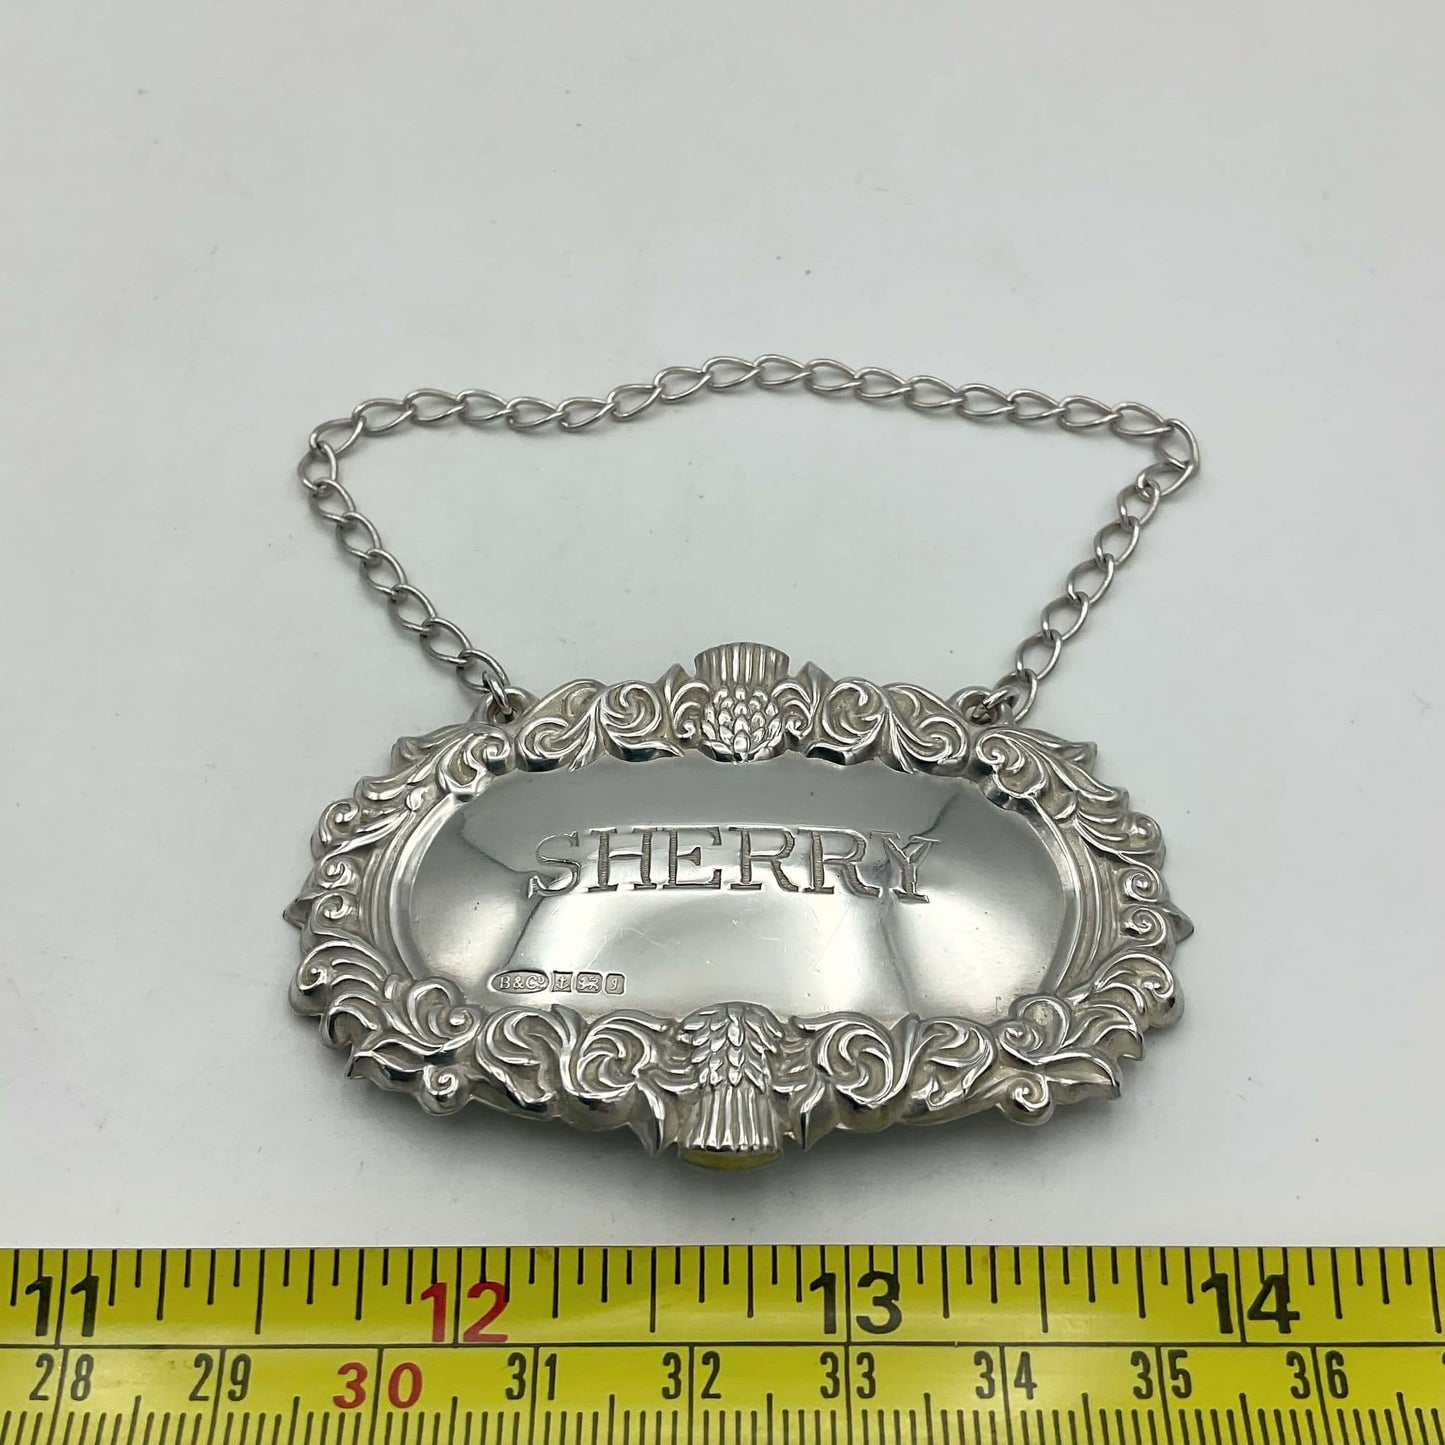 1983 Sterling Silver Sherry Decanter Label